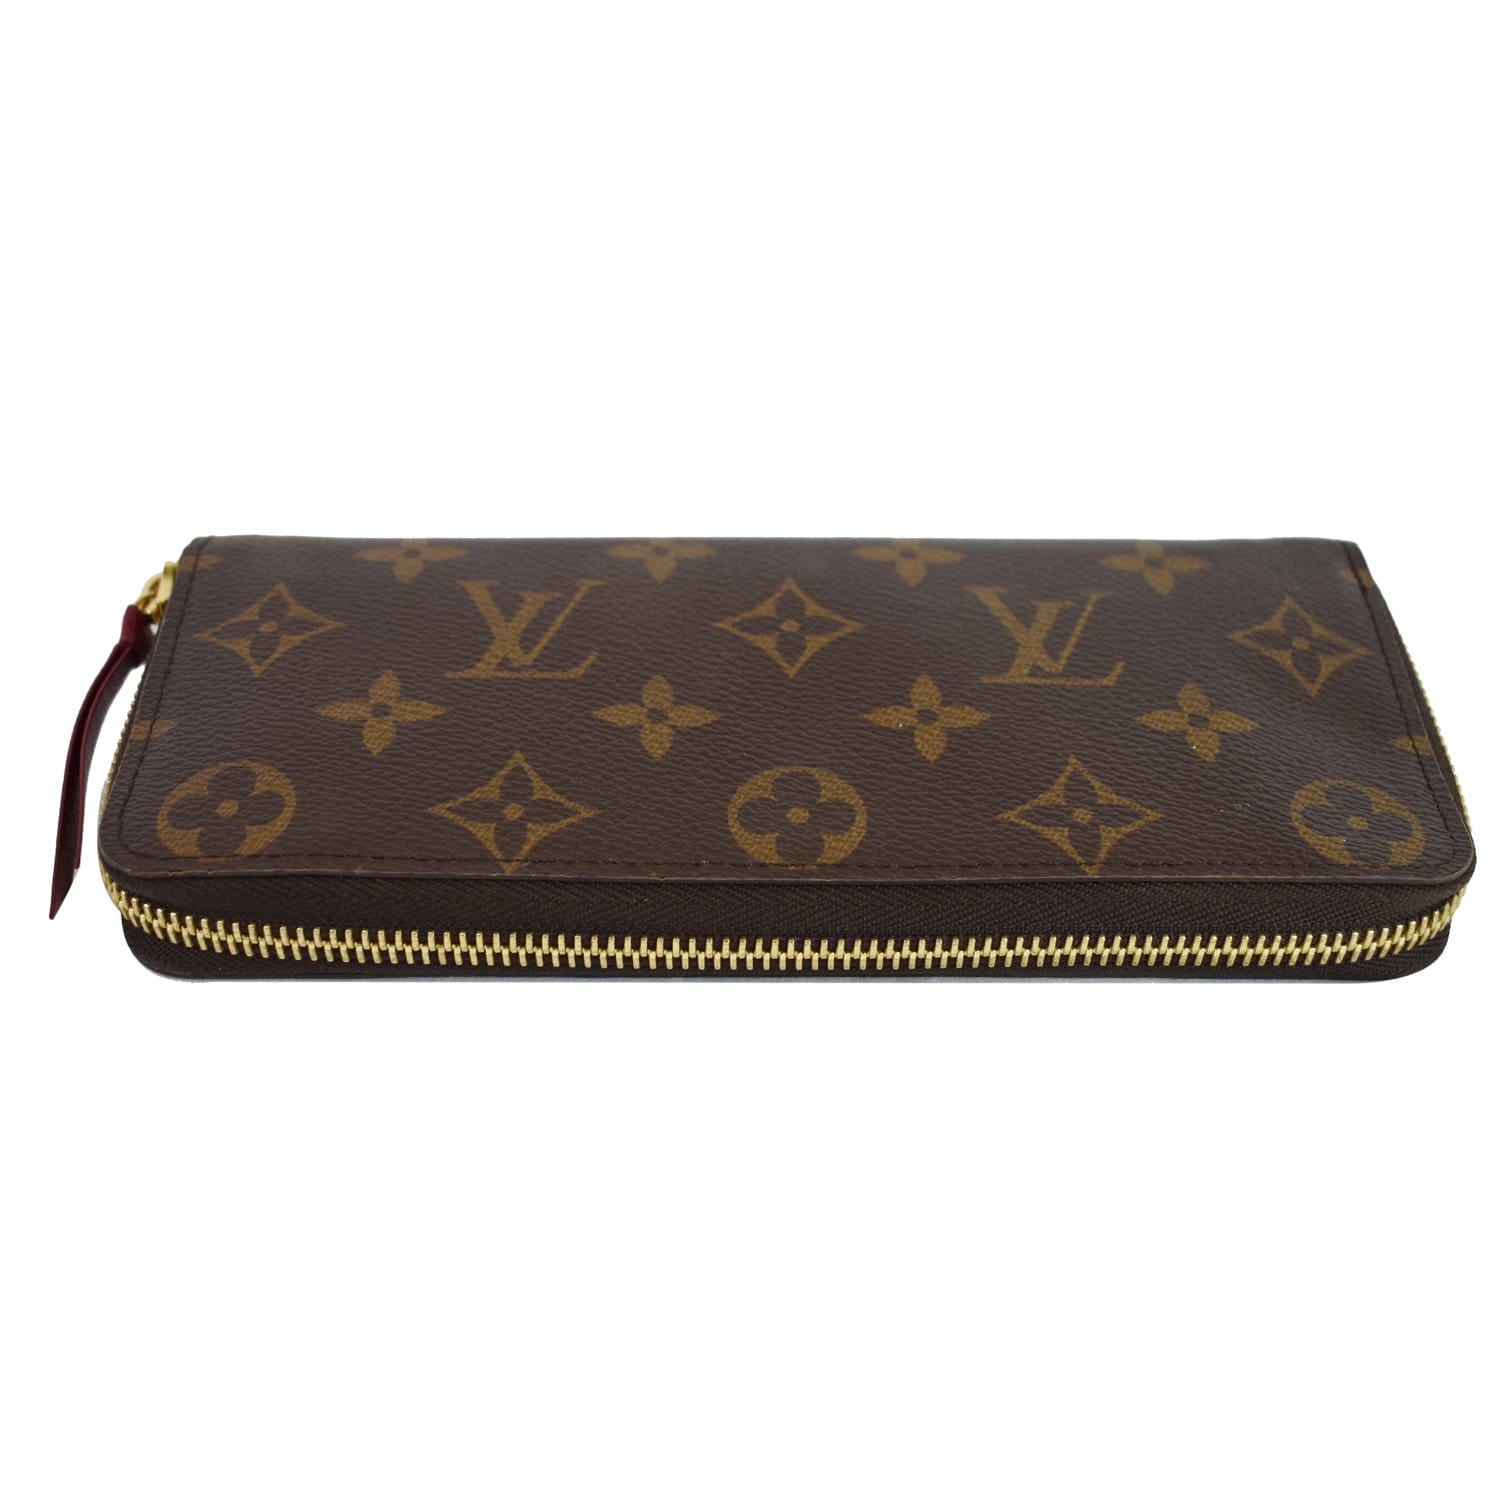 lv wallet clemence